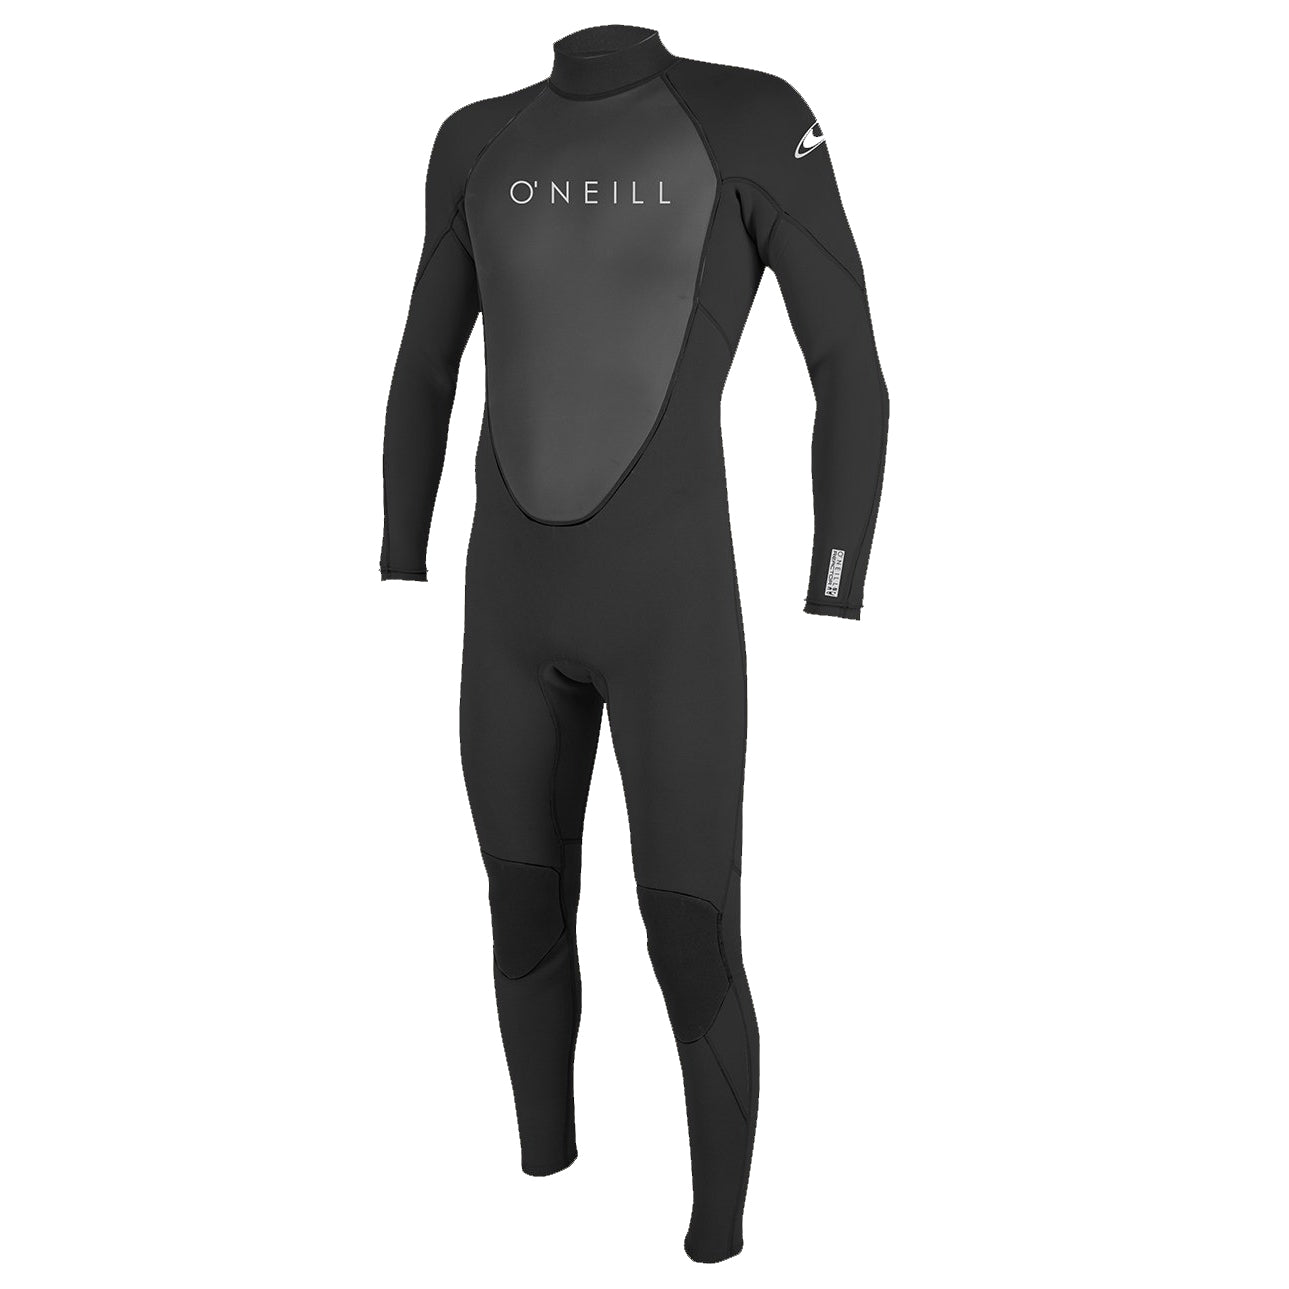 O'Neill Reactor II 3/2 Back Zip Full Wetsuit offers exceptional durability and performance.